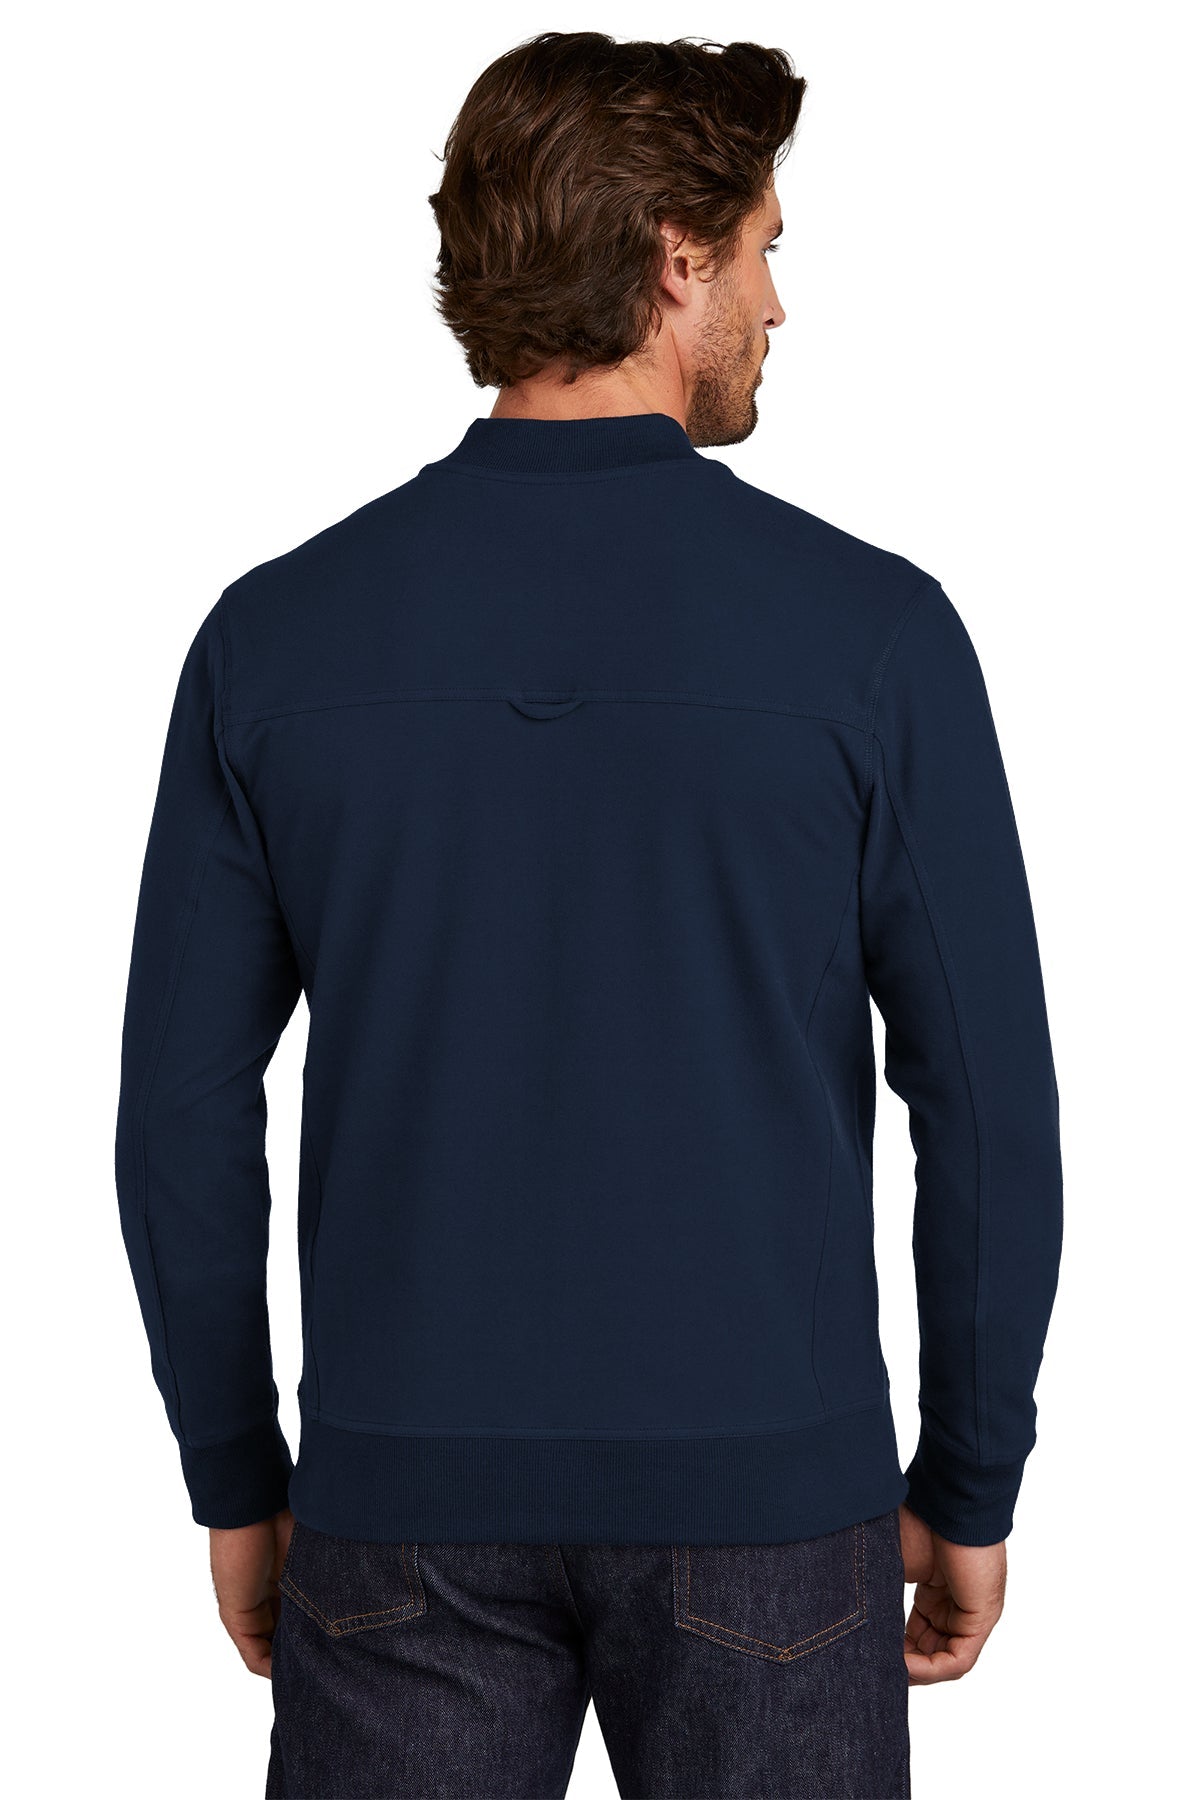 OGIO Outstretch Customized Jackets, River Blue Navy